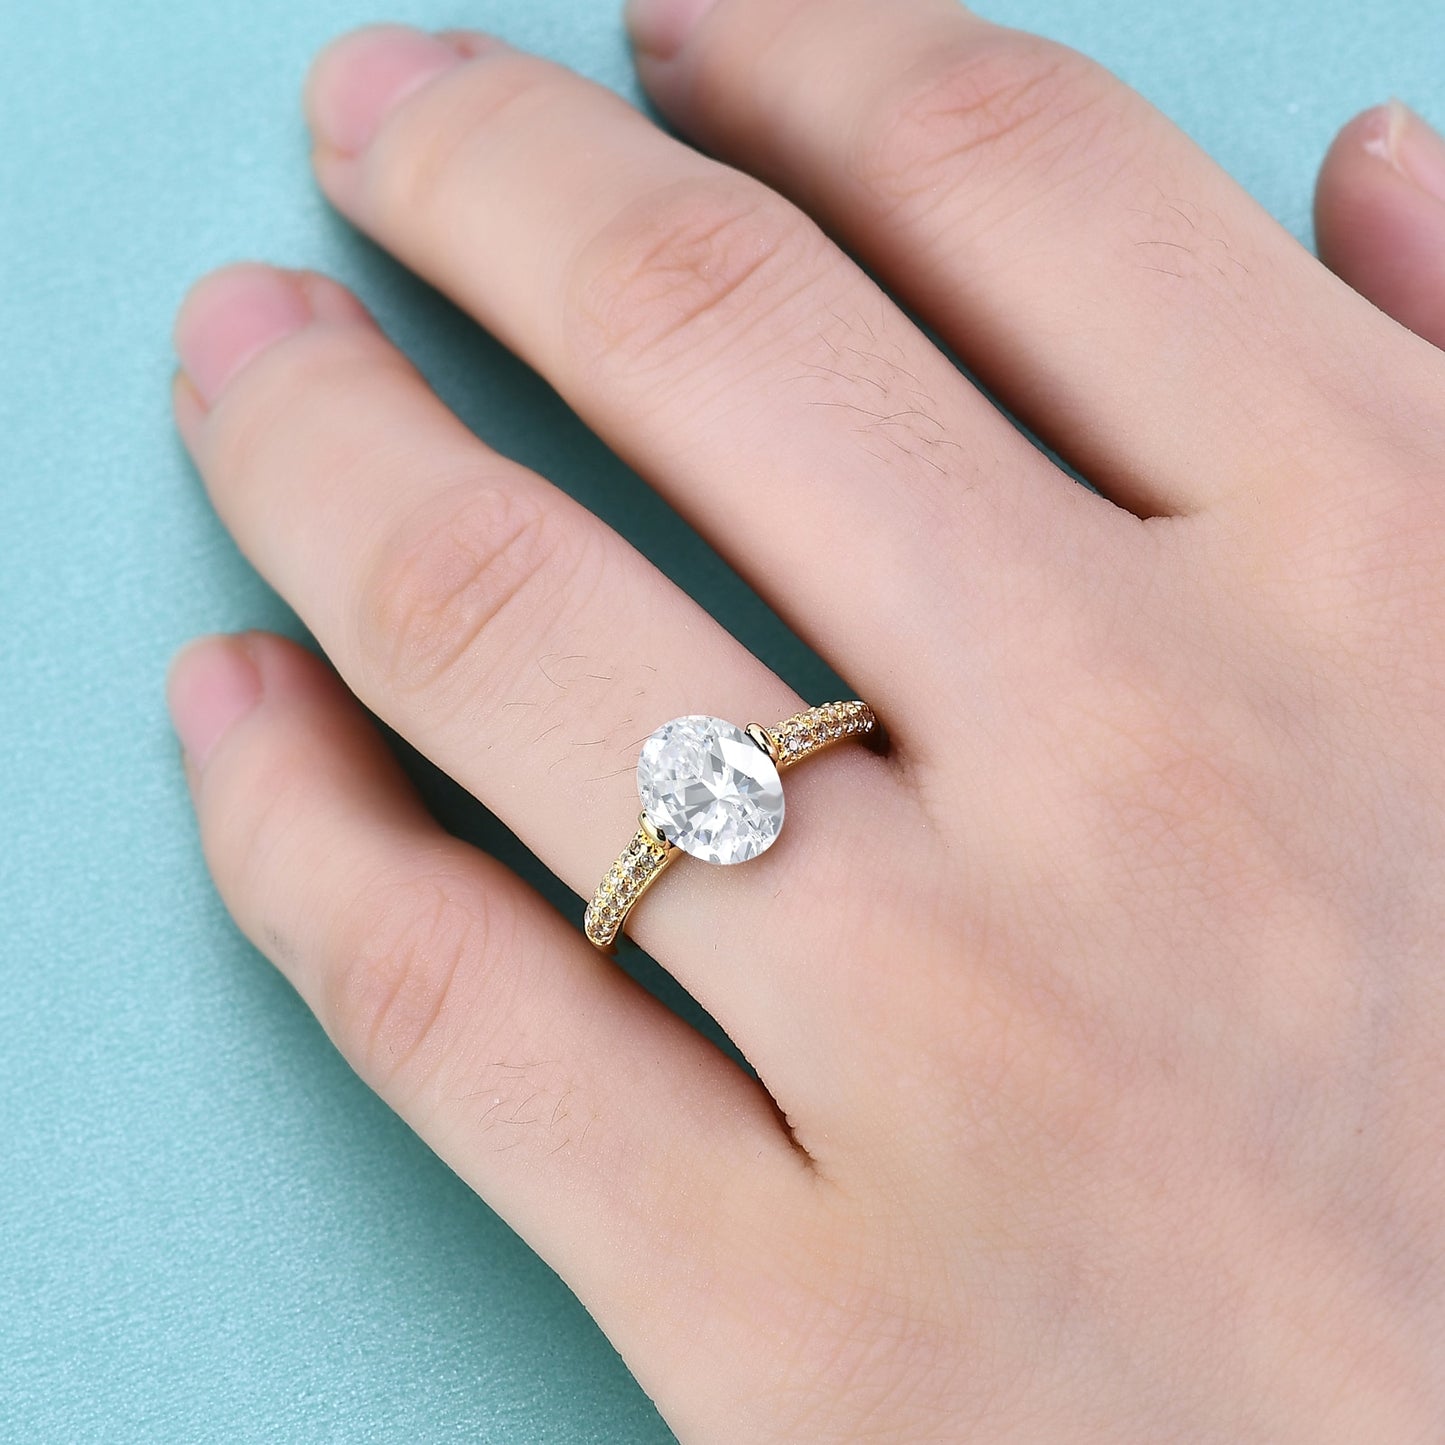 A gold tension set ring with a oval moissanite and double row pave band worn on the ring finger of a hand.